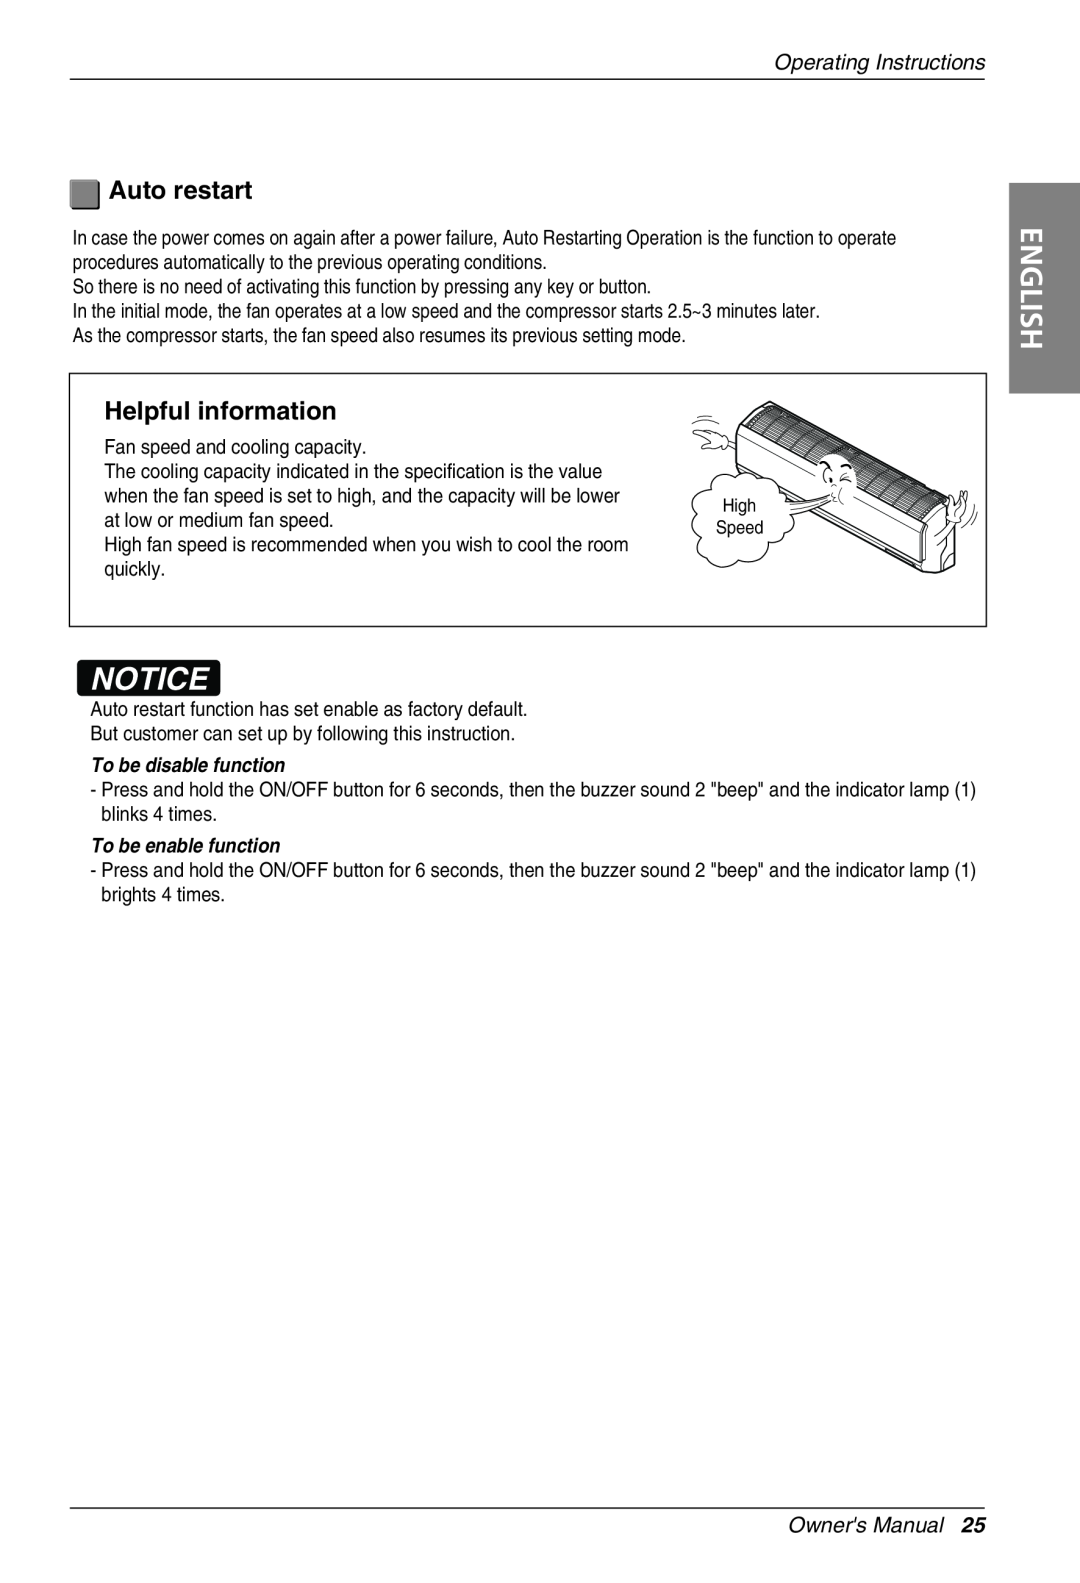 Beko LG-BKE 7800D owner manual Auto restart, Helpful information, English, Operating Instructions, To be disable function 